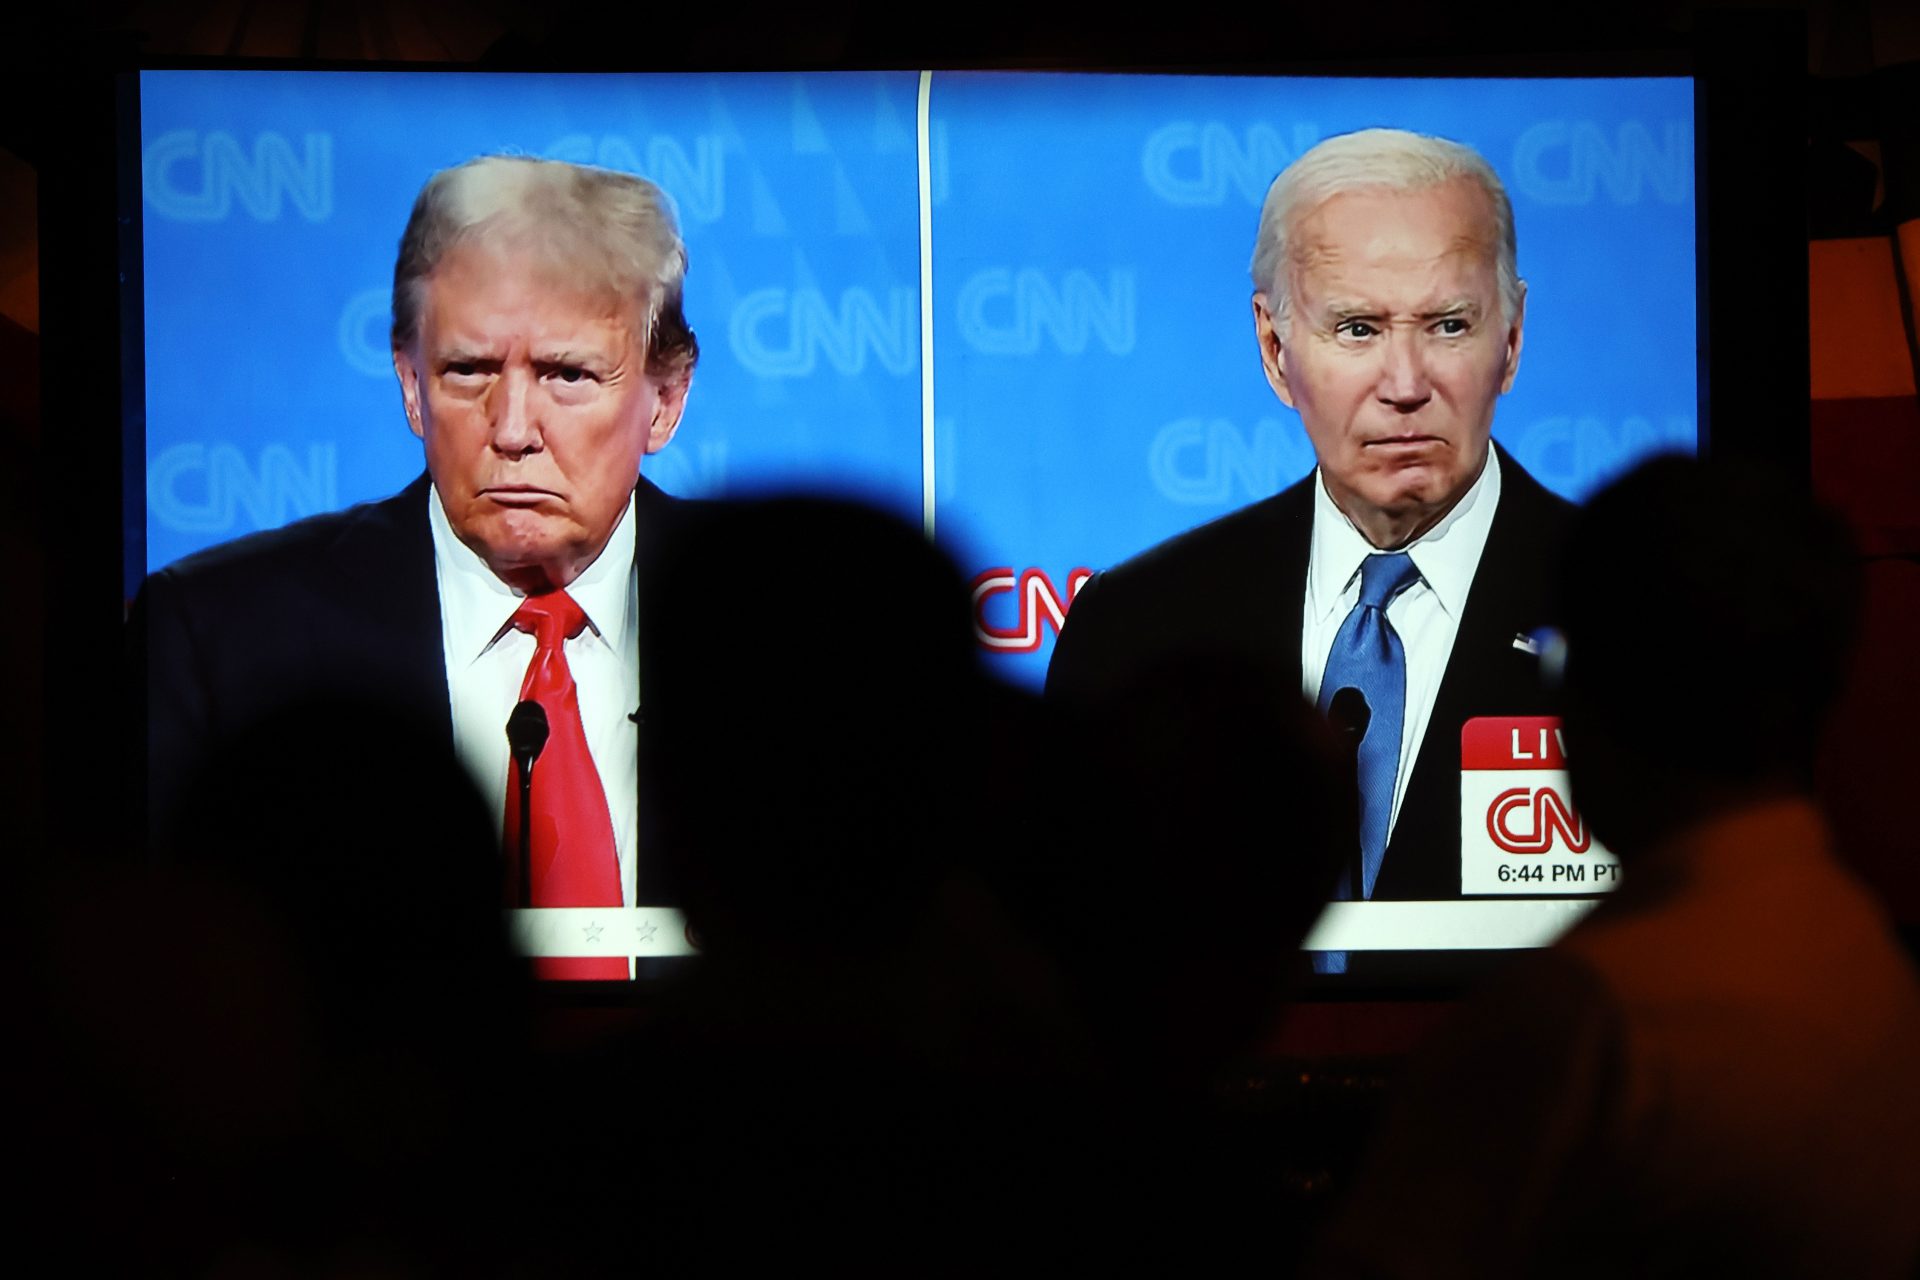 Biden's gaffes and Trump's lies ignited the first 2024 debate